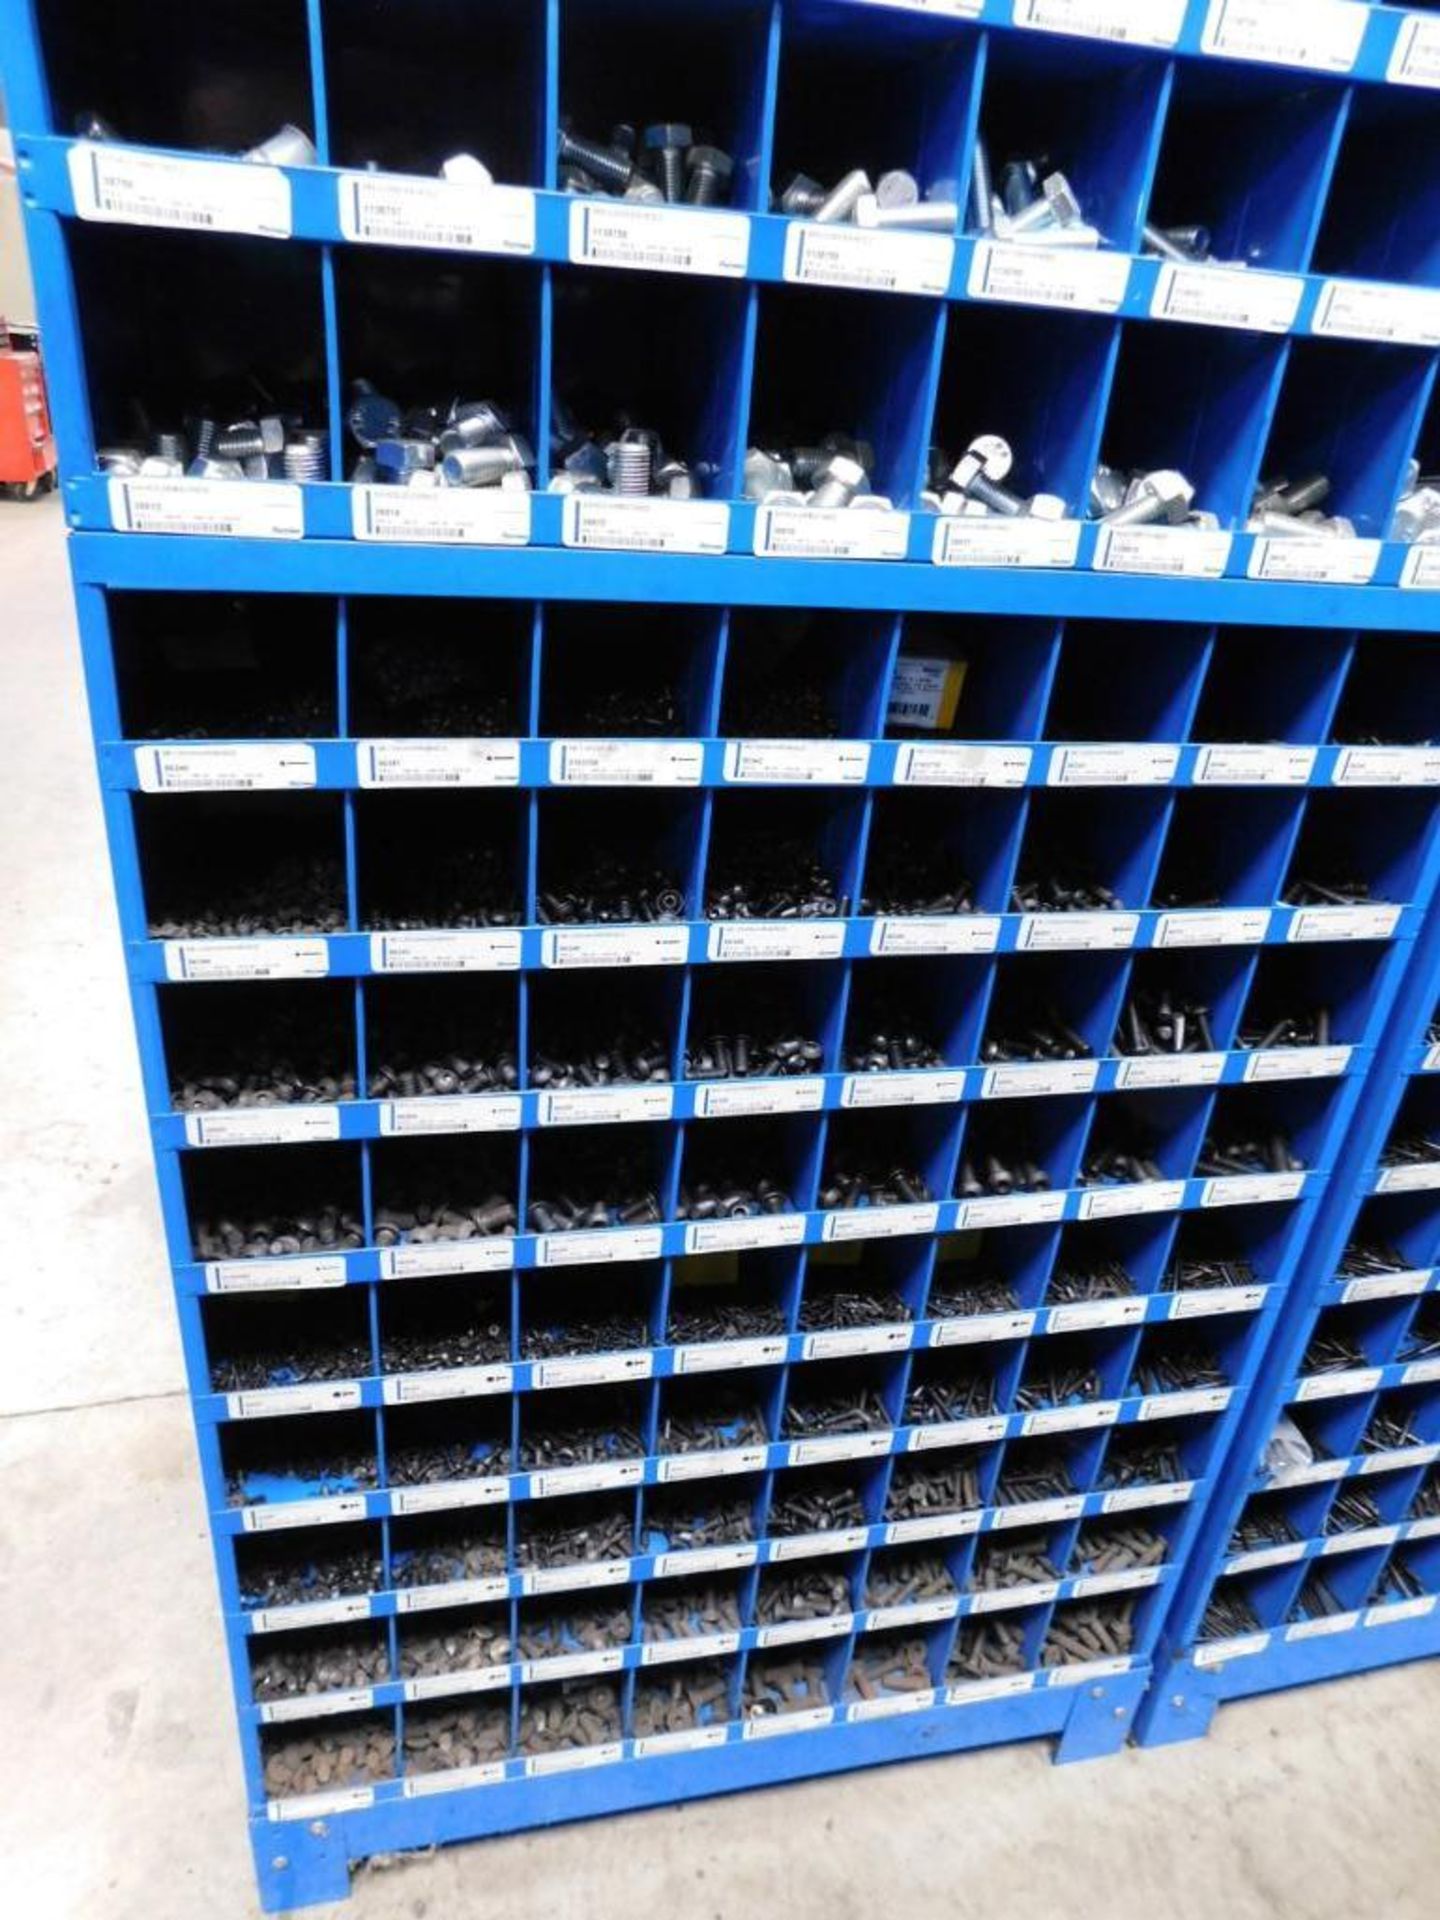 LOT: (5) Sections Fastenal Compartment Organizers w/Contents of Assorted Hardware, Bolts, Nuts, Wash - Image 3 of 11